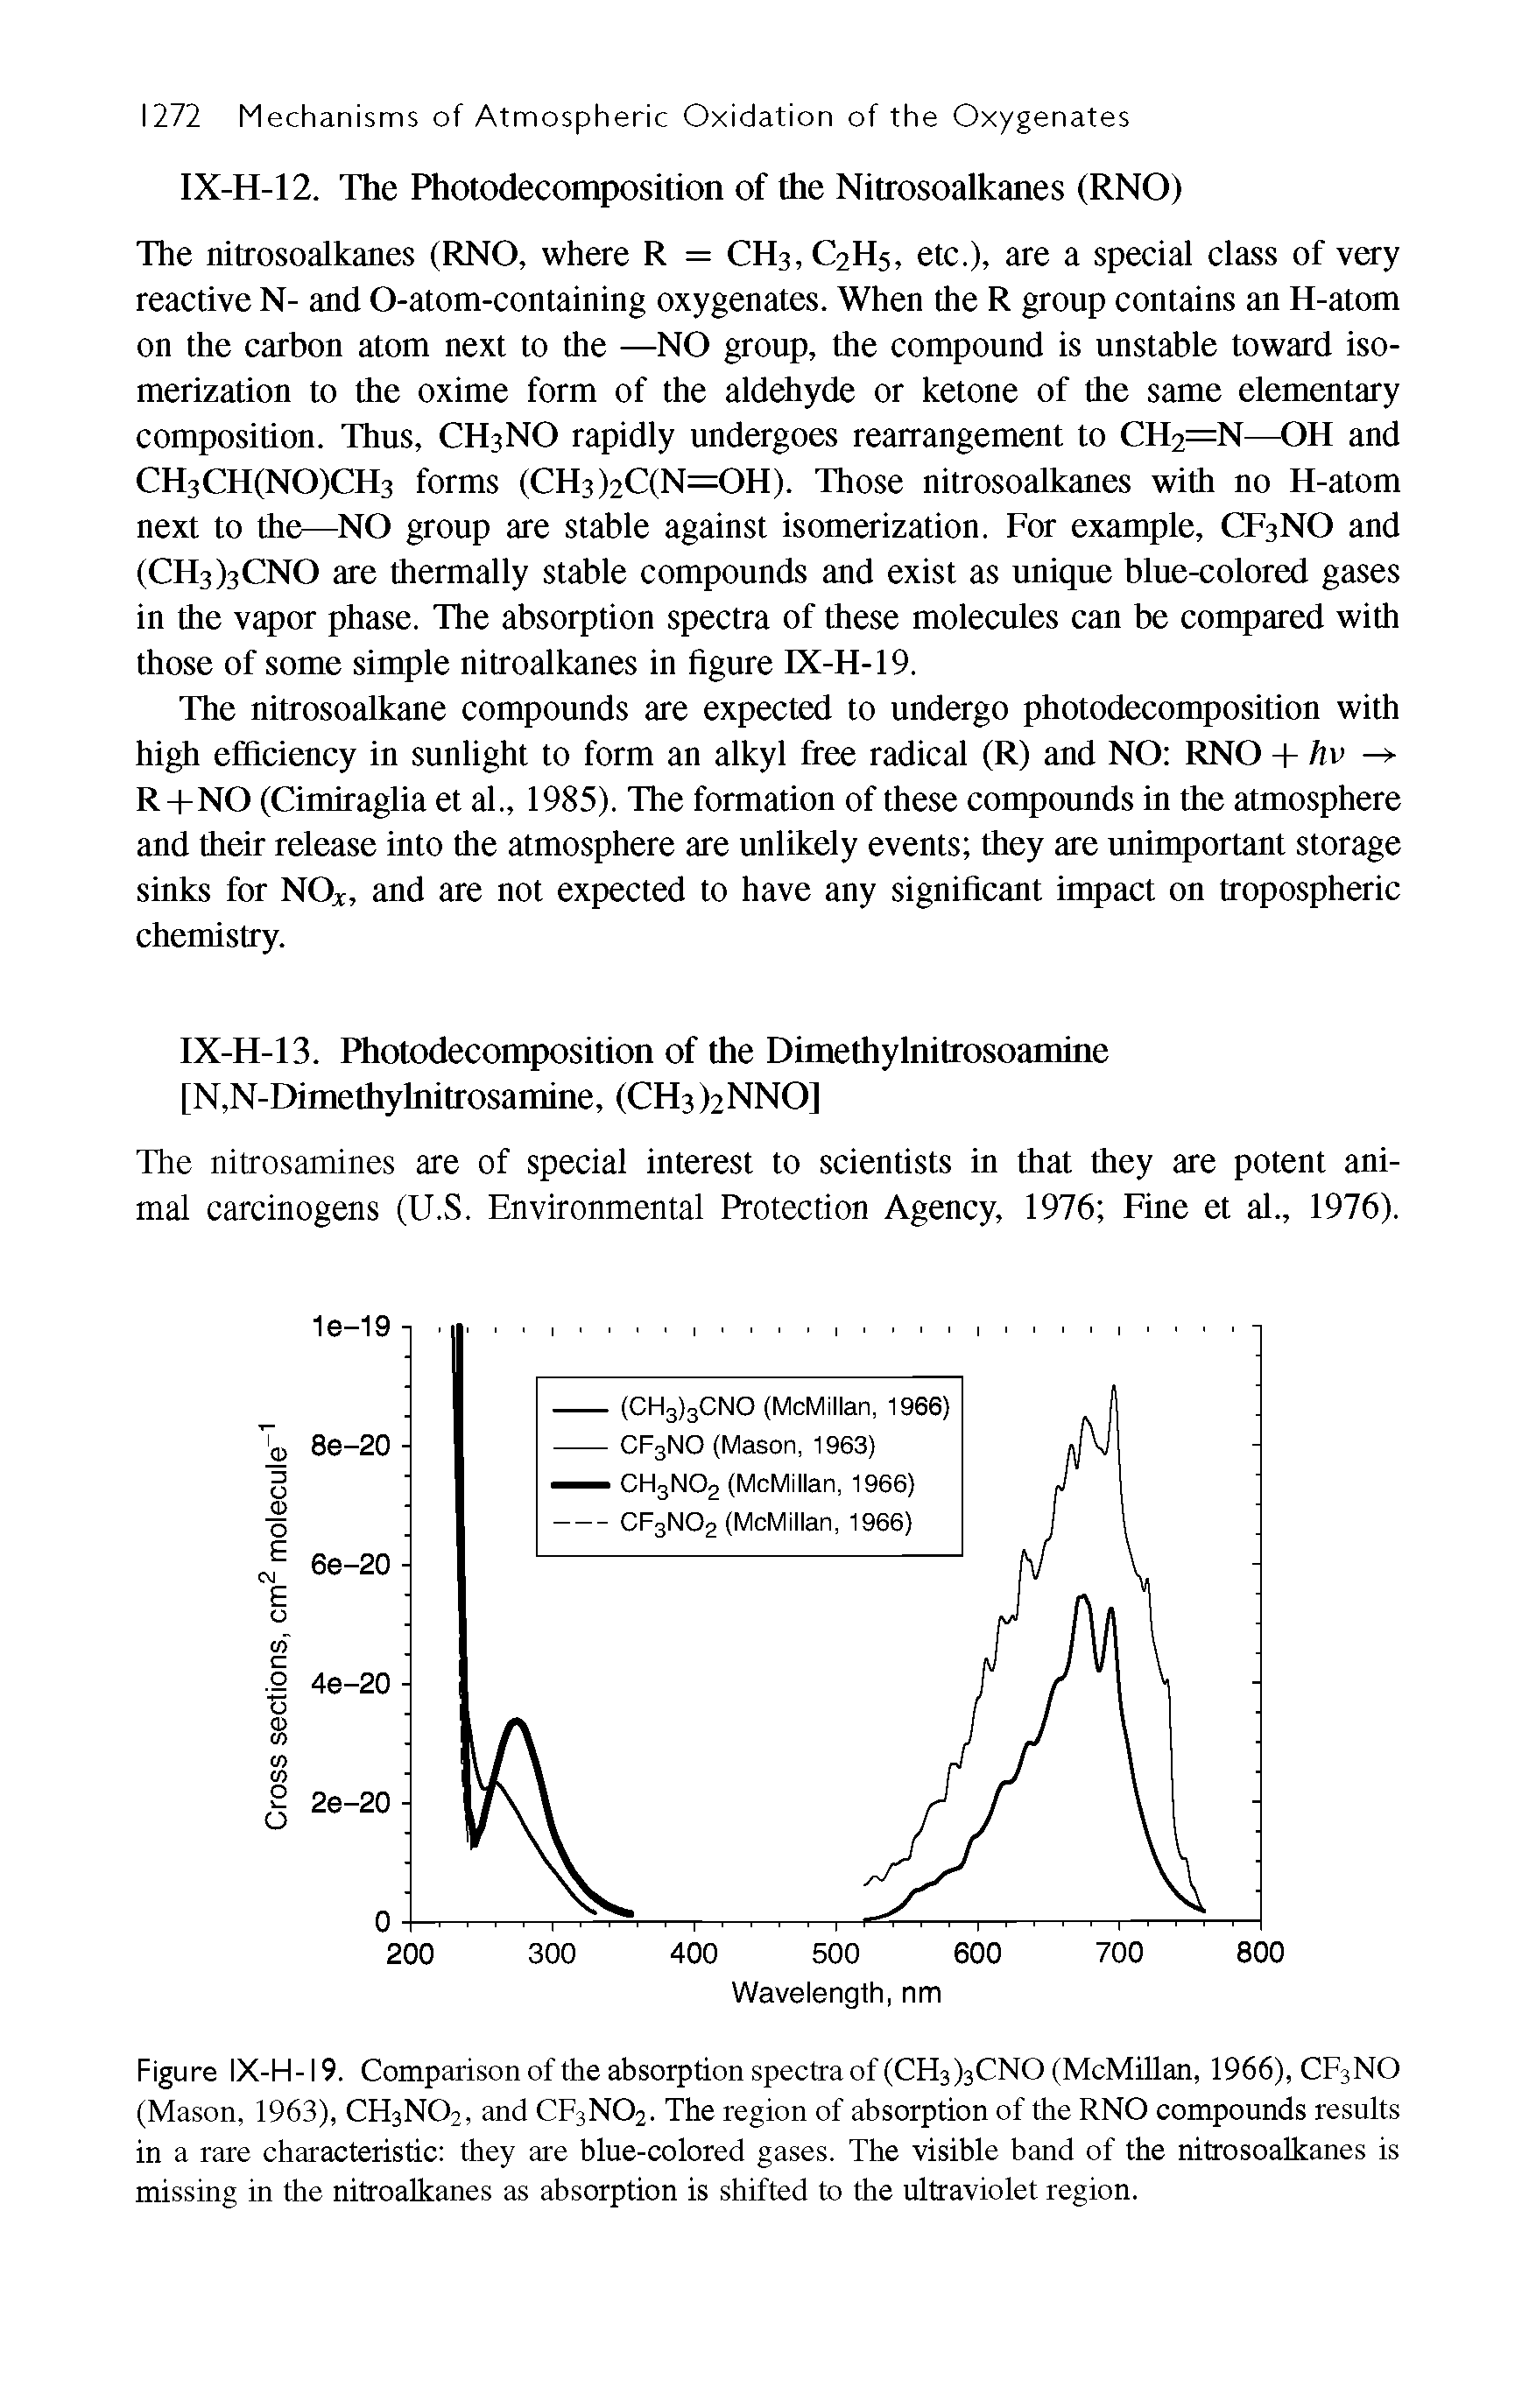 Figure IX-H-19. Comparison of the absorption spectra of (CH3)3CNO (McMillan, 1966), CF3NO (Mason, 1963), CH3NO2, and CF3NO2. The region of absorption of the RNO compounds results in a rare characteristic they are blue-colored gases. The visible band of the nitrosoalkanes is missing in the nitroalkanes as absorption is shifted to the ultraviolet region.